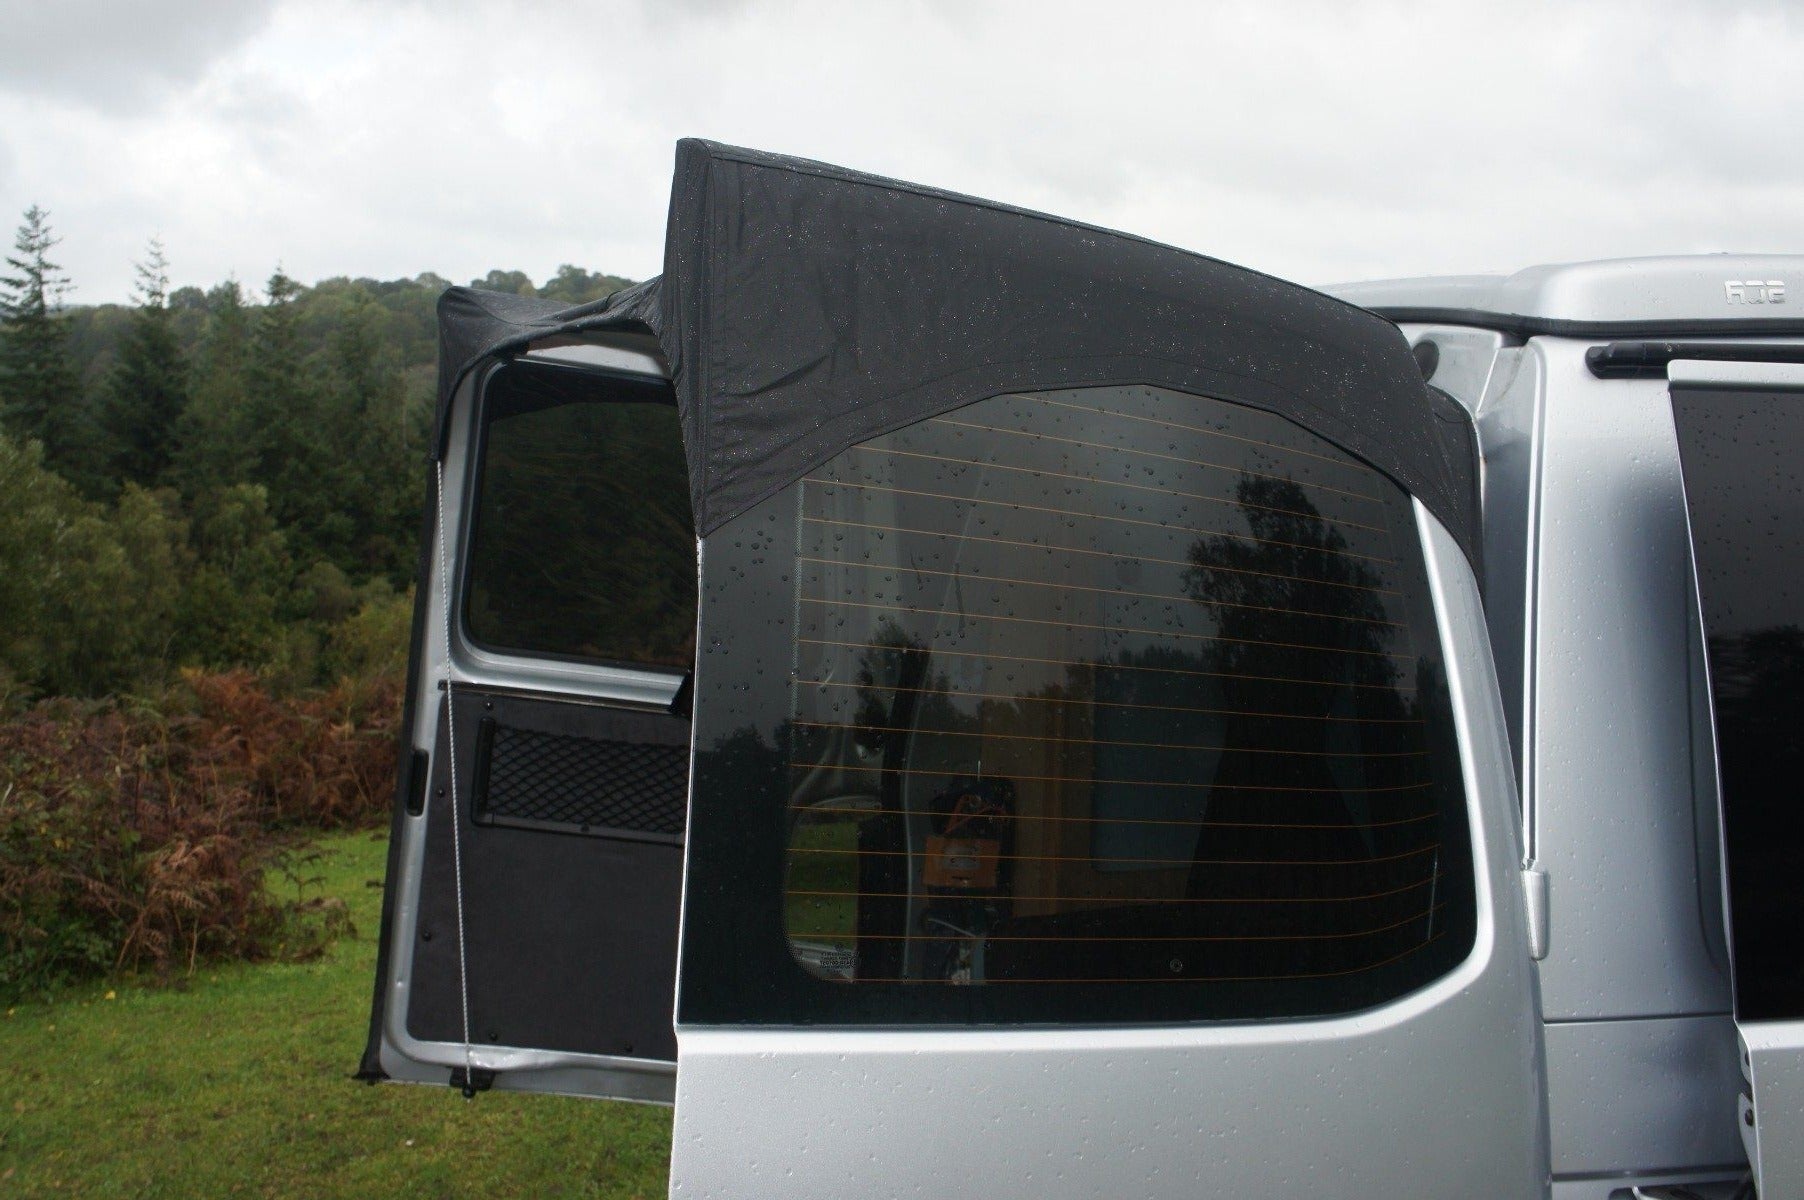 210D Rear Barn Door Awning Cover Black Fit for Ford Transit Custom 2013  Onwards for VW T5 T6 Campervan Wear-resistant Waterproof - AliExpress